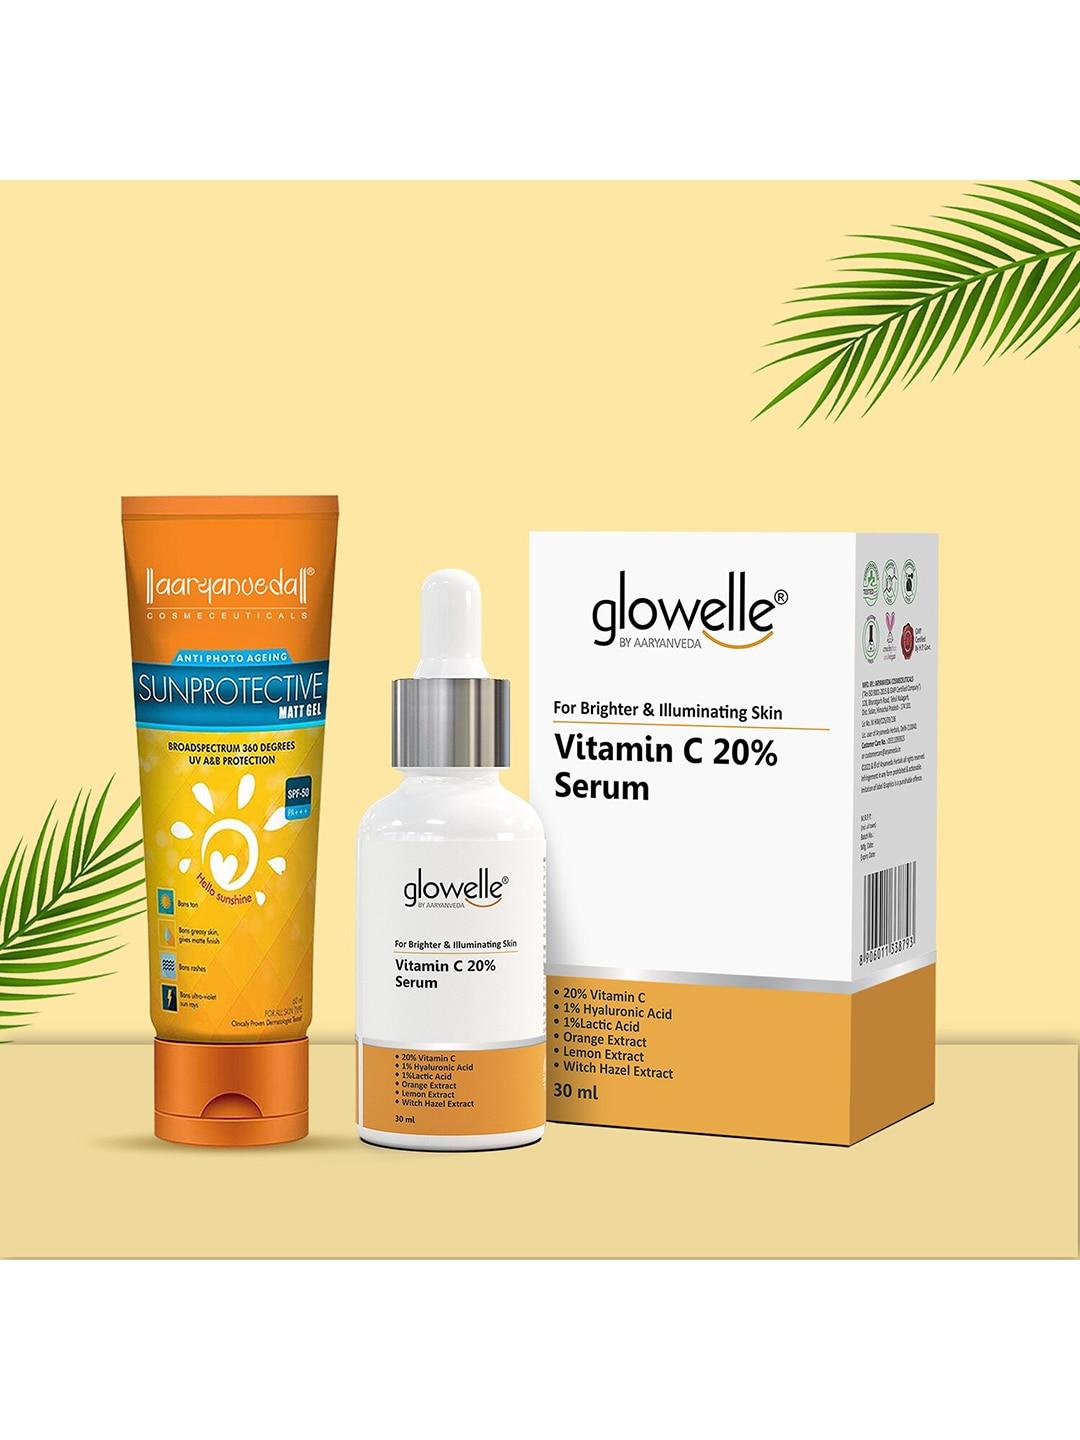 Aryanveda Sunscreen Spf 50 PA+++ With Glowelle Vitamin C Face Serum For Illuminated Skin 90g each